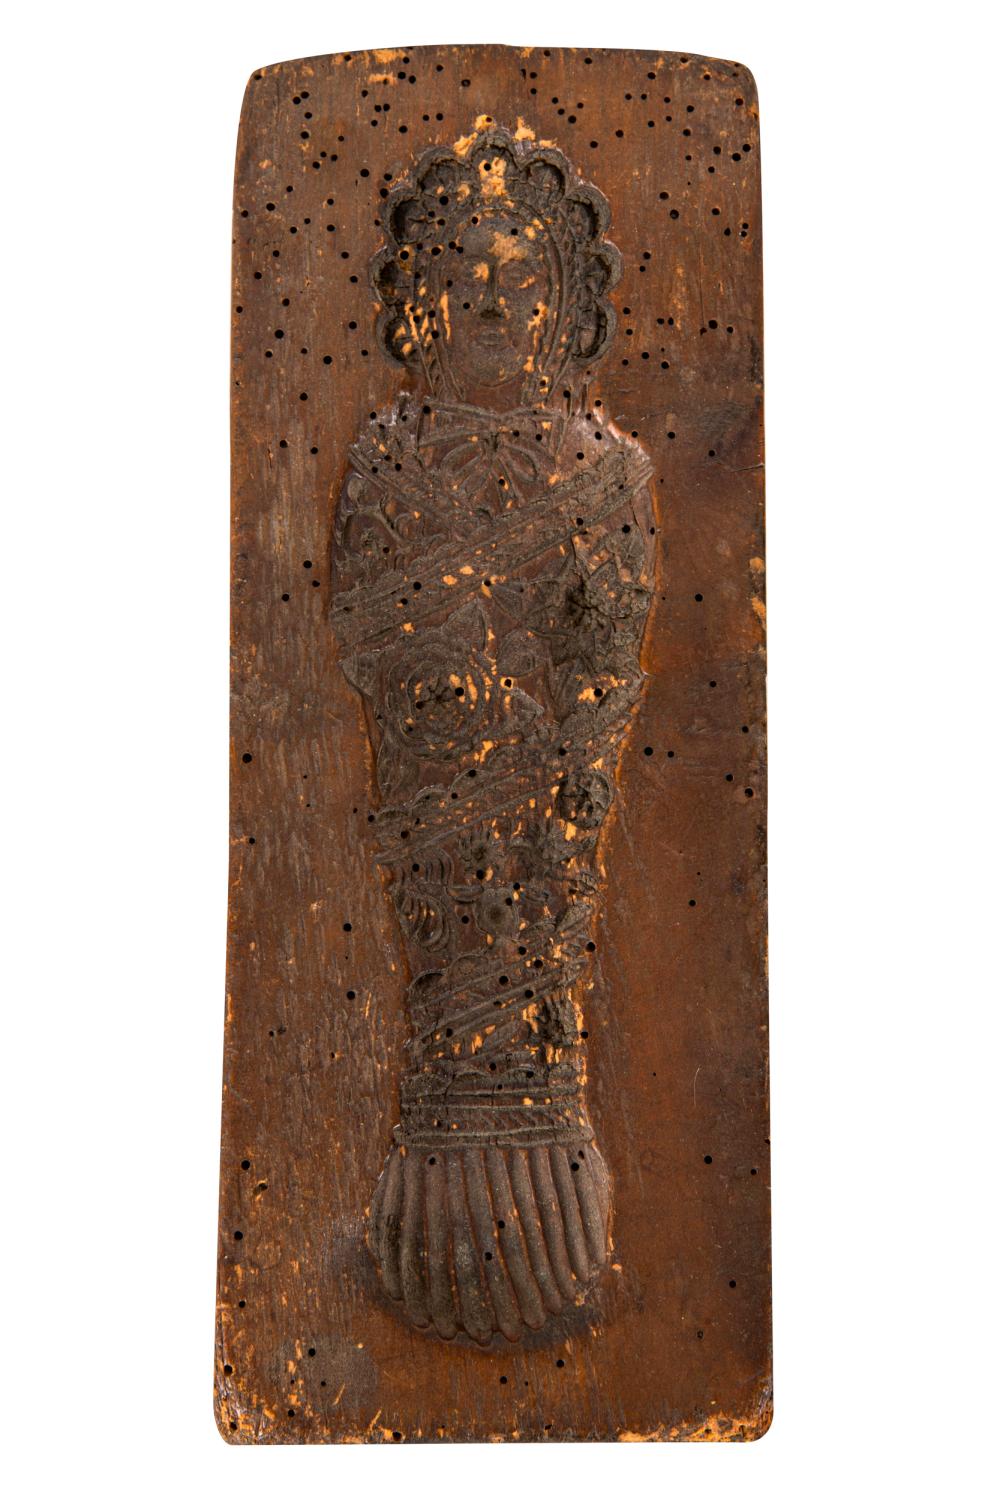 CARVED WOOD SPRINGERLE MOLDprobably 332336